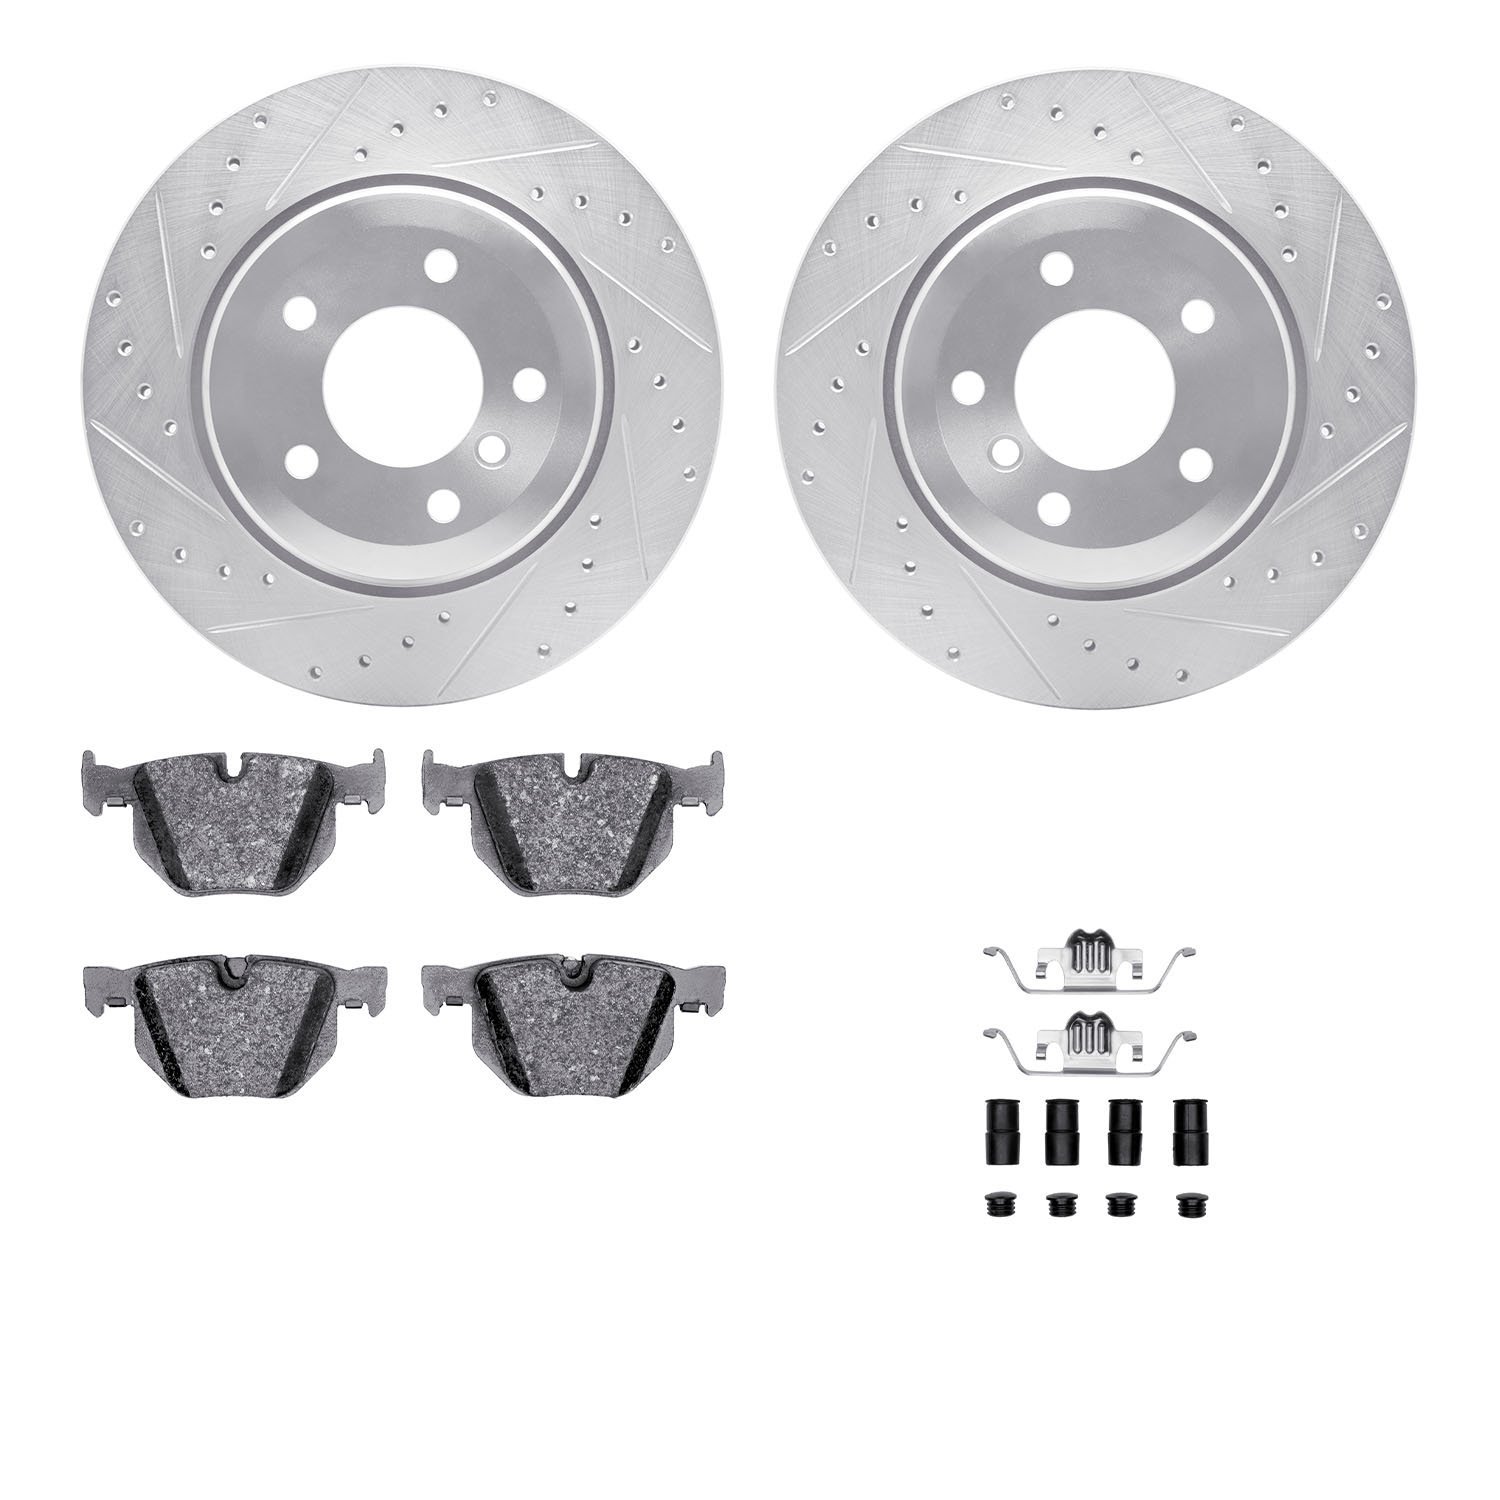 7312-31055 Drilled/Slotted Brake Rotor with 3000-Series Ceramic Brake Pads Kit & Hardware [Silver], 2004-2010 BMW, Position: Rea